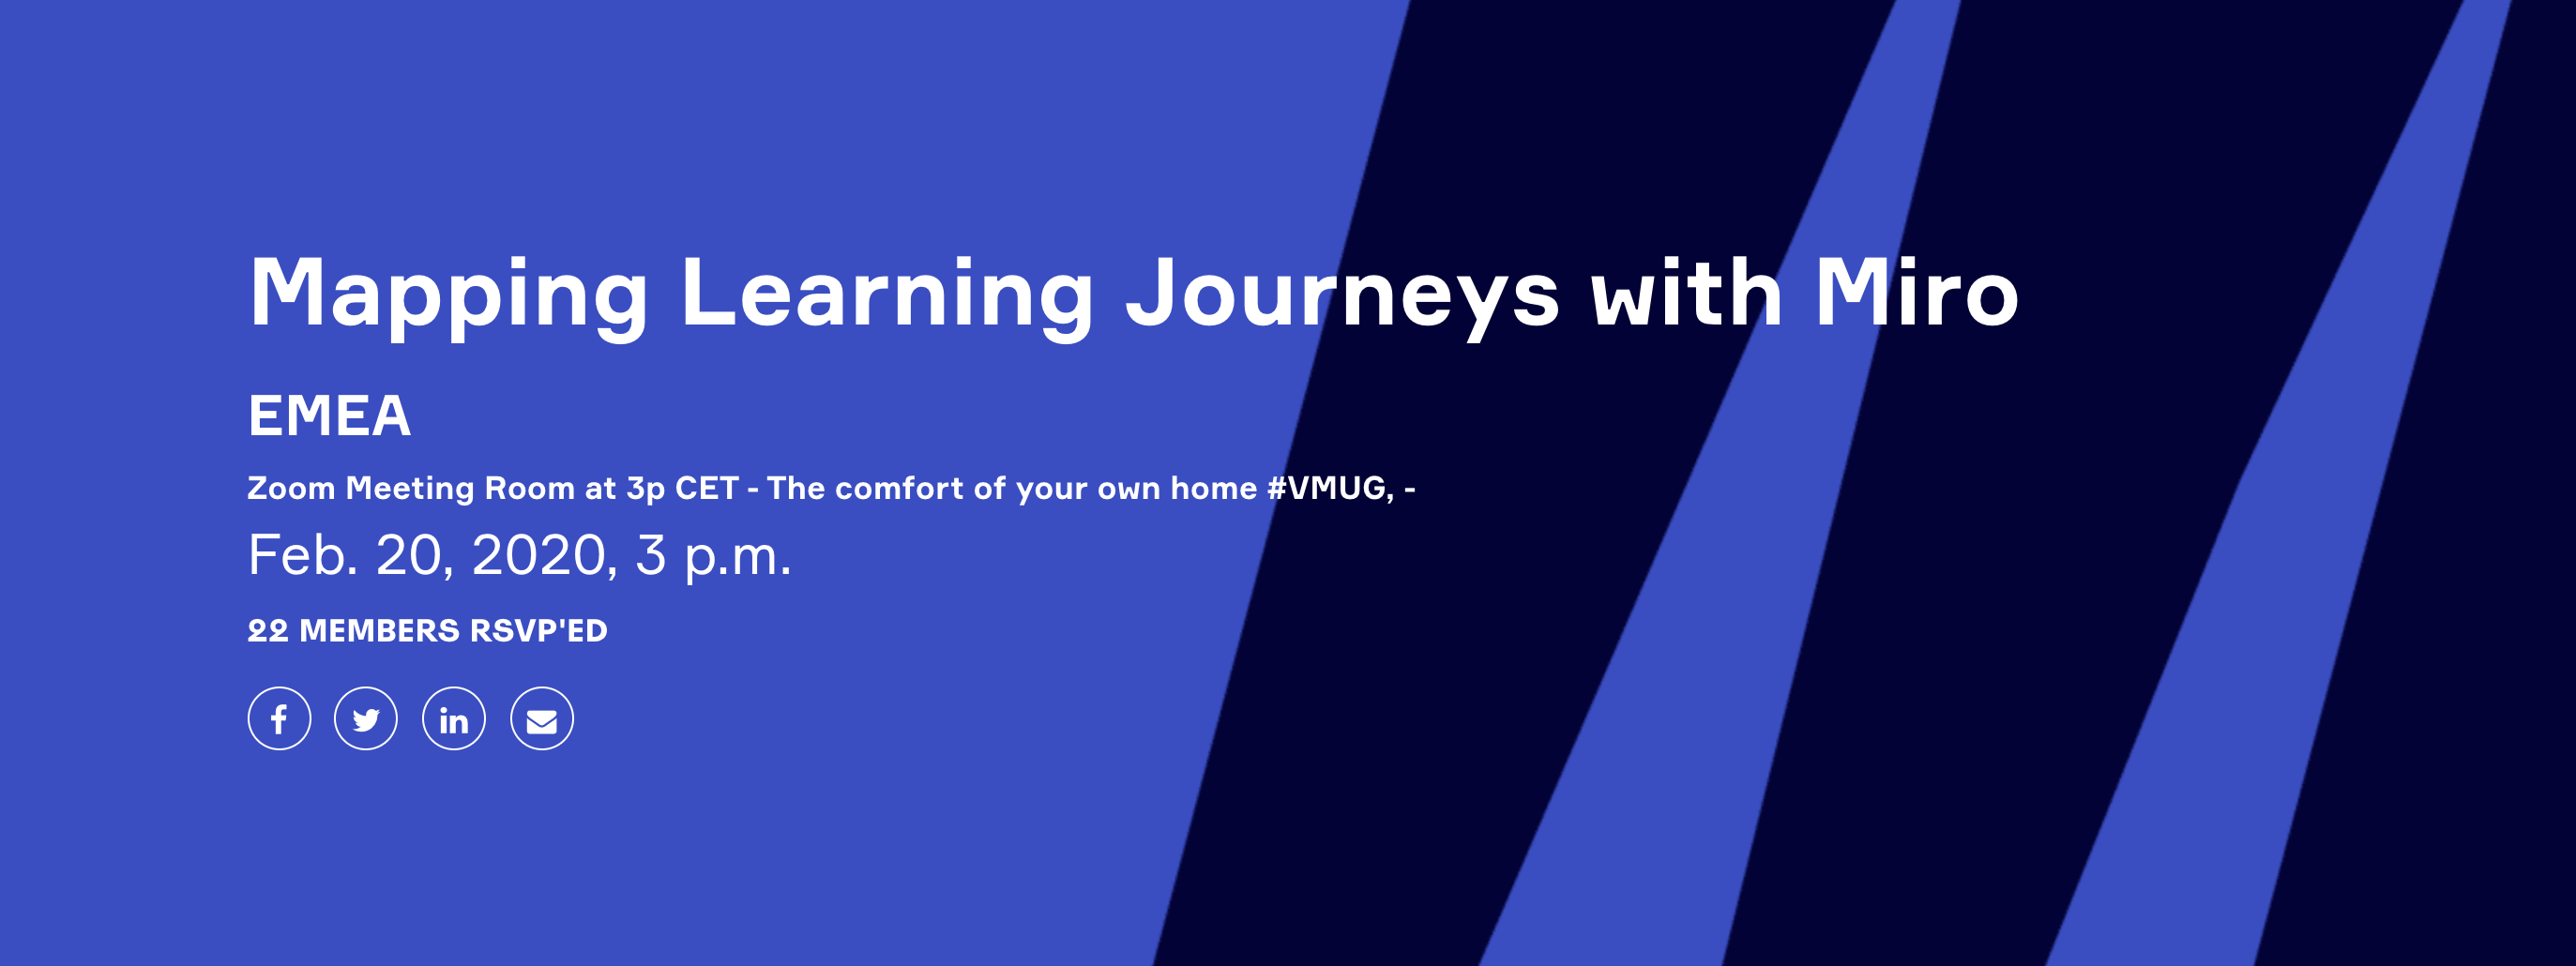 Mapping Learning Journeys with Miro